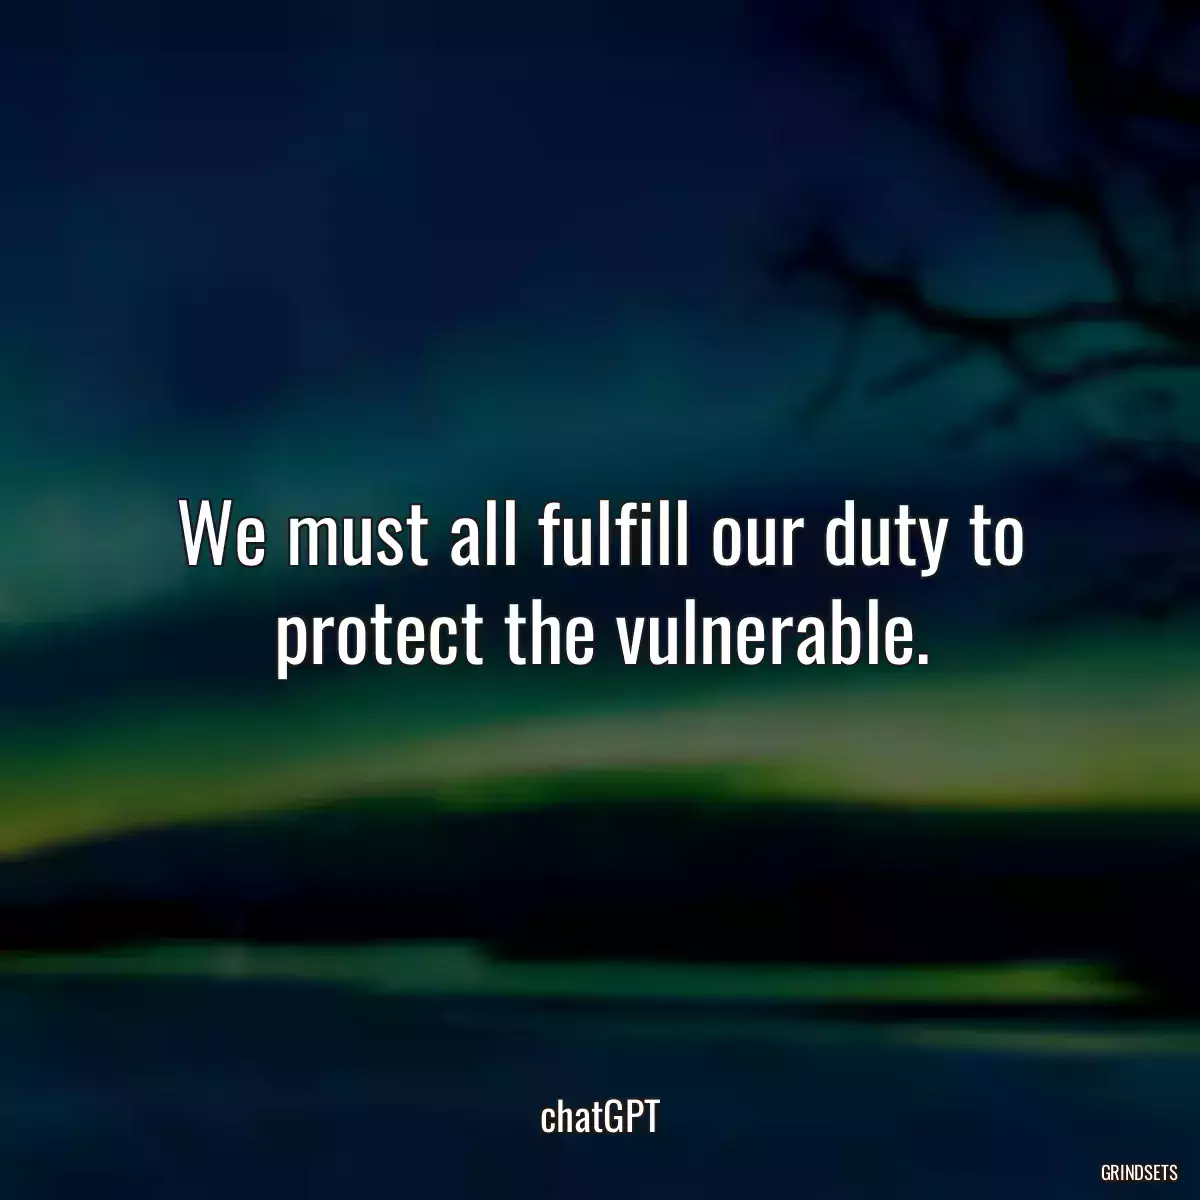 We must all fulfill our duty to protect the vulnerable.